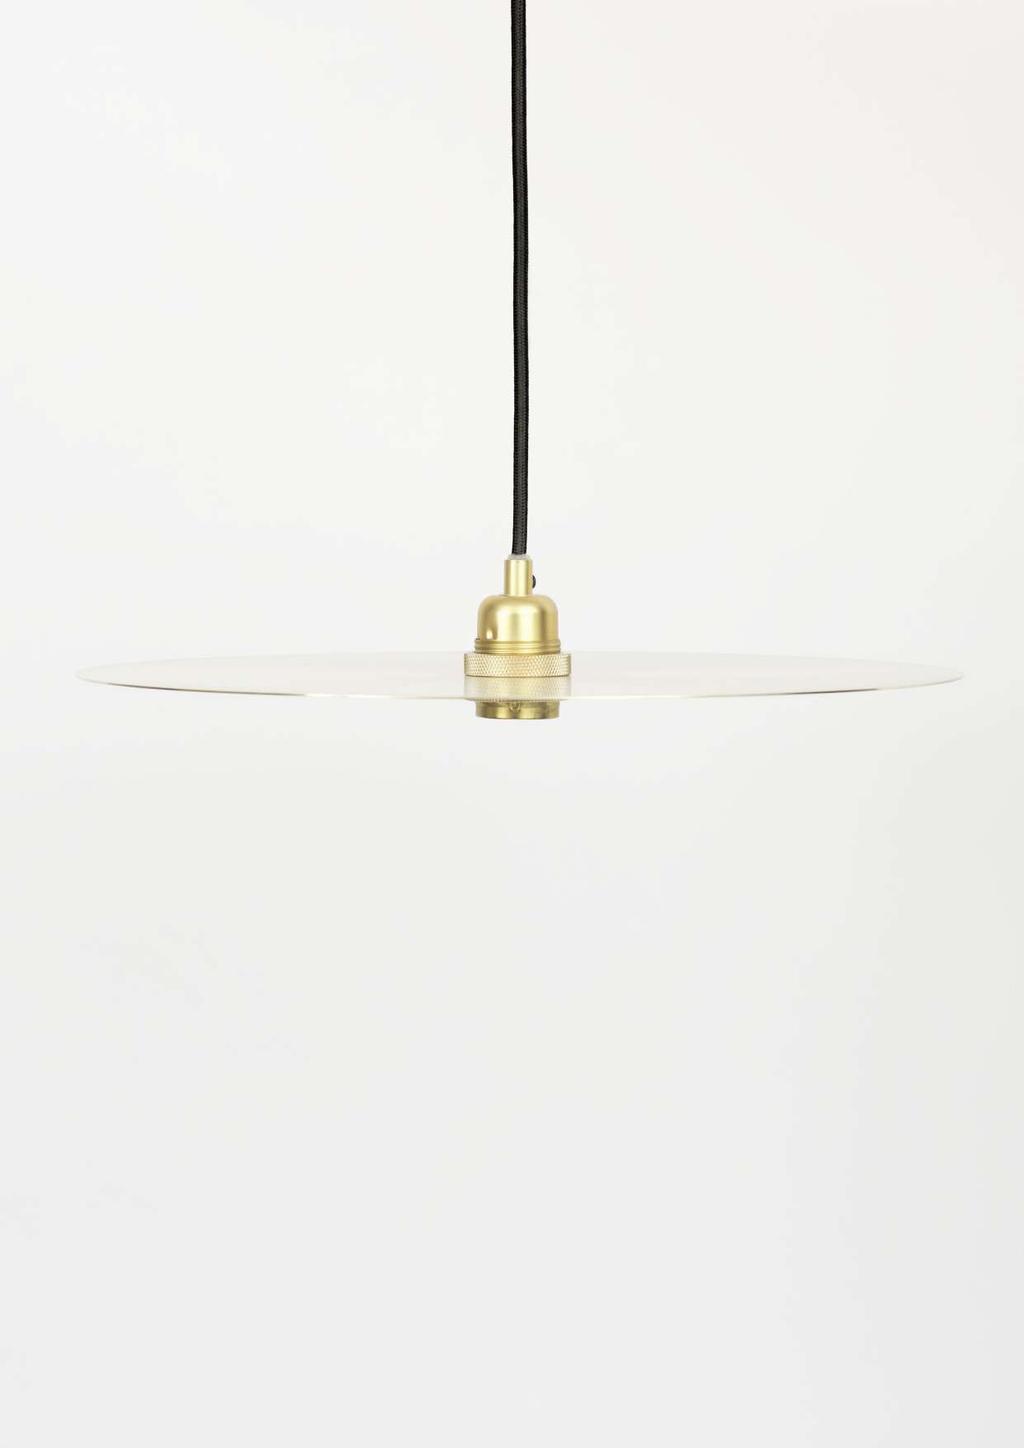 Ø350 Ø250 Ø150 GEOMETRIC SHADE CIRCLE Design Frama Year 2015 Typology Collection Origin Material Finish Note Lampshade Permanent lighting Denmark Brass Clear wet laquered Available as a set with E27